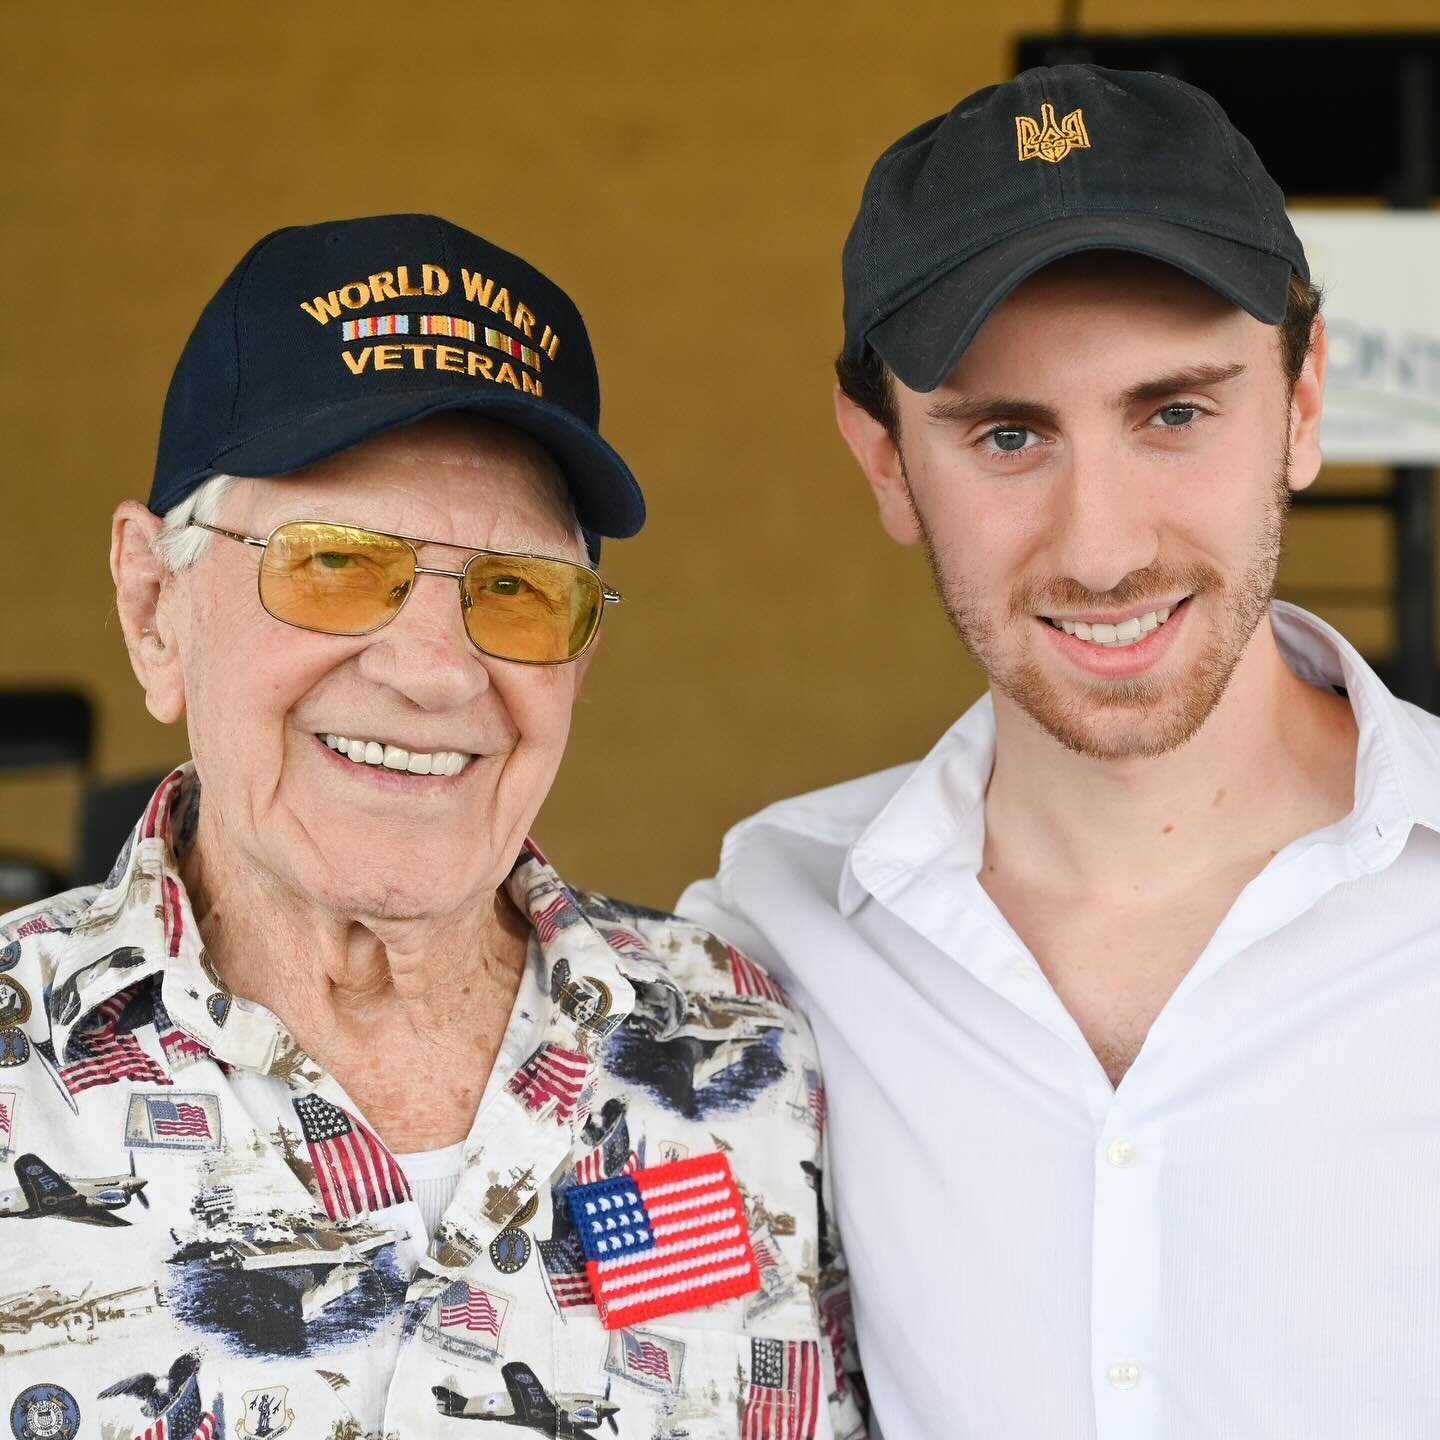 Please join me in mourning the loss of my dear friend Frank Klum, WWII veteran of the 12th Air Force, who passed away Monday at age 101. I first met Frank almost nine years ago, in the Summer of 2015, when he was 92 and I was 13. He was the second ve